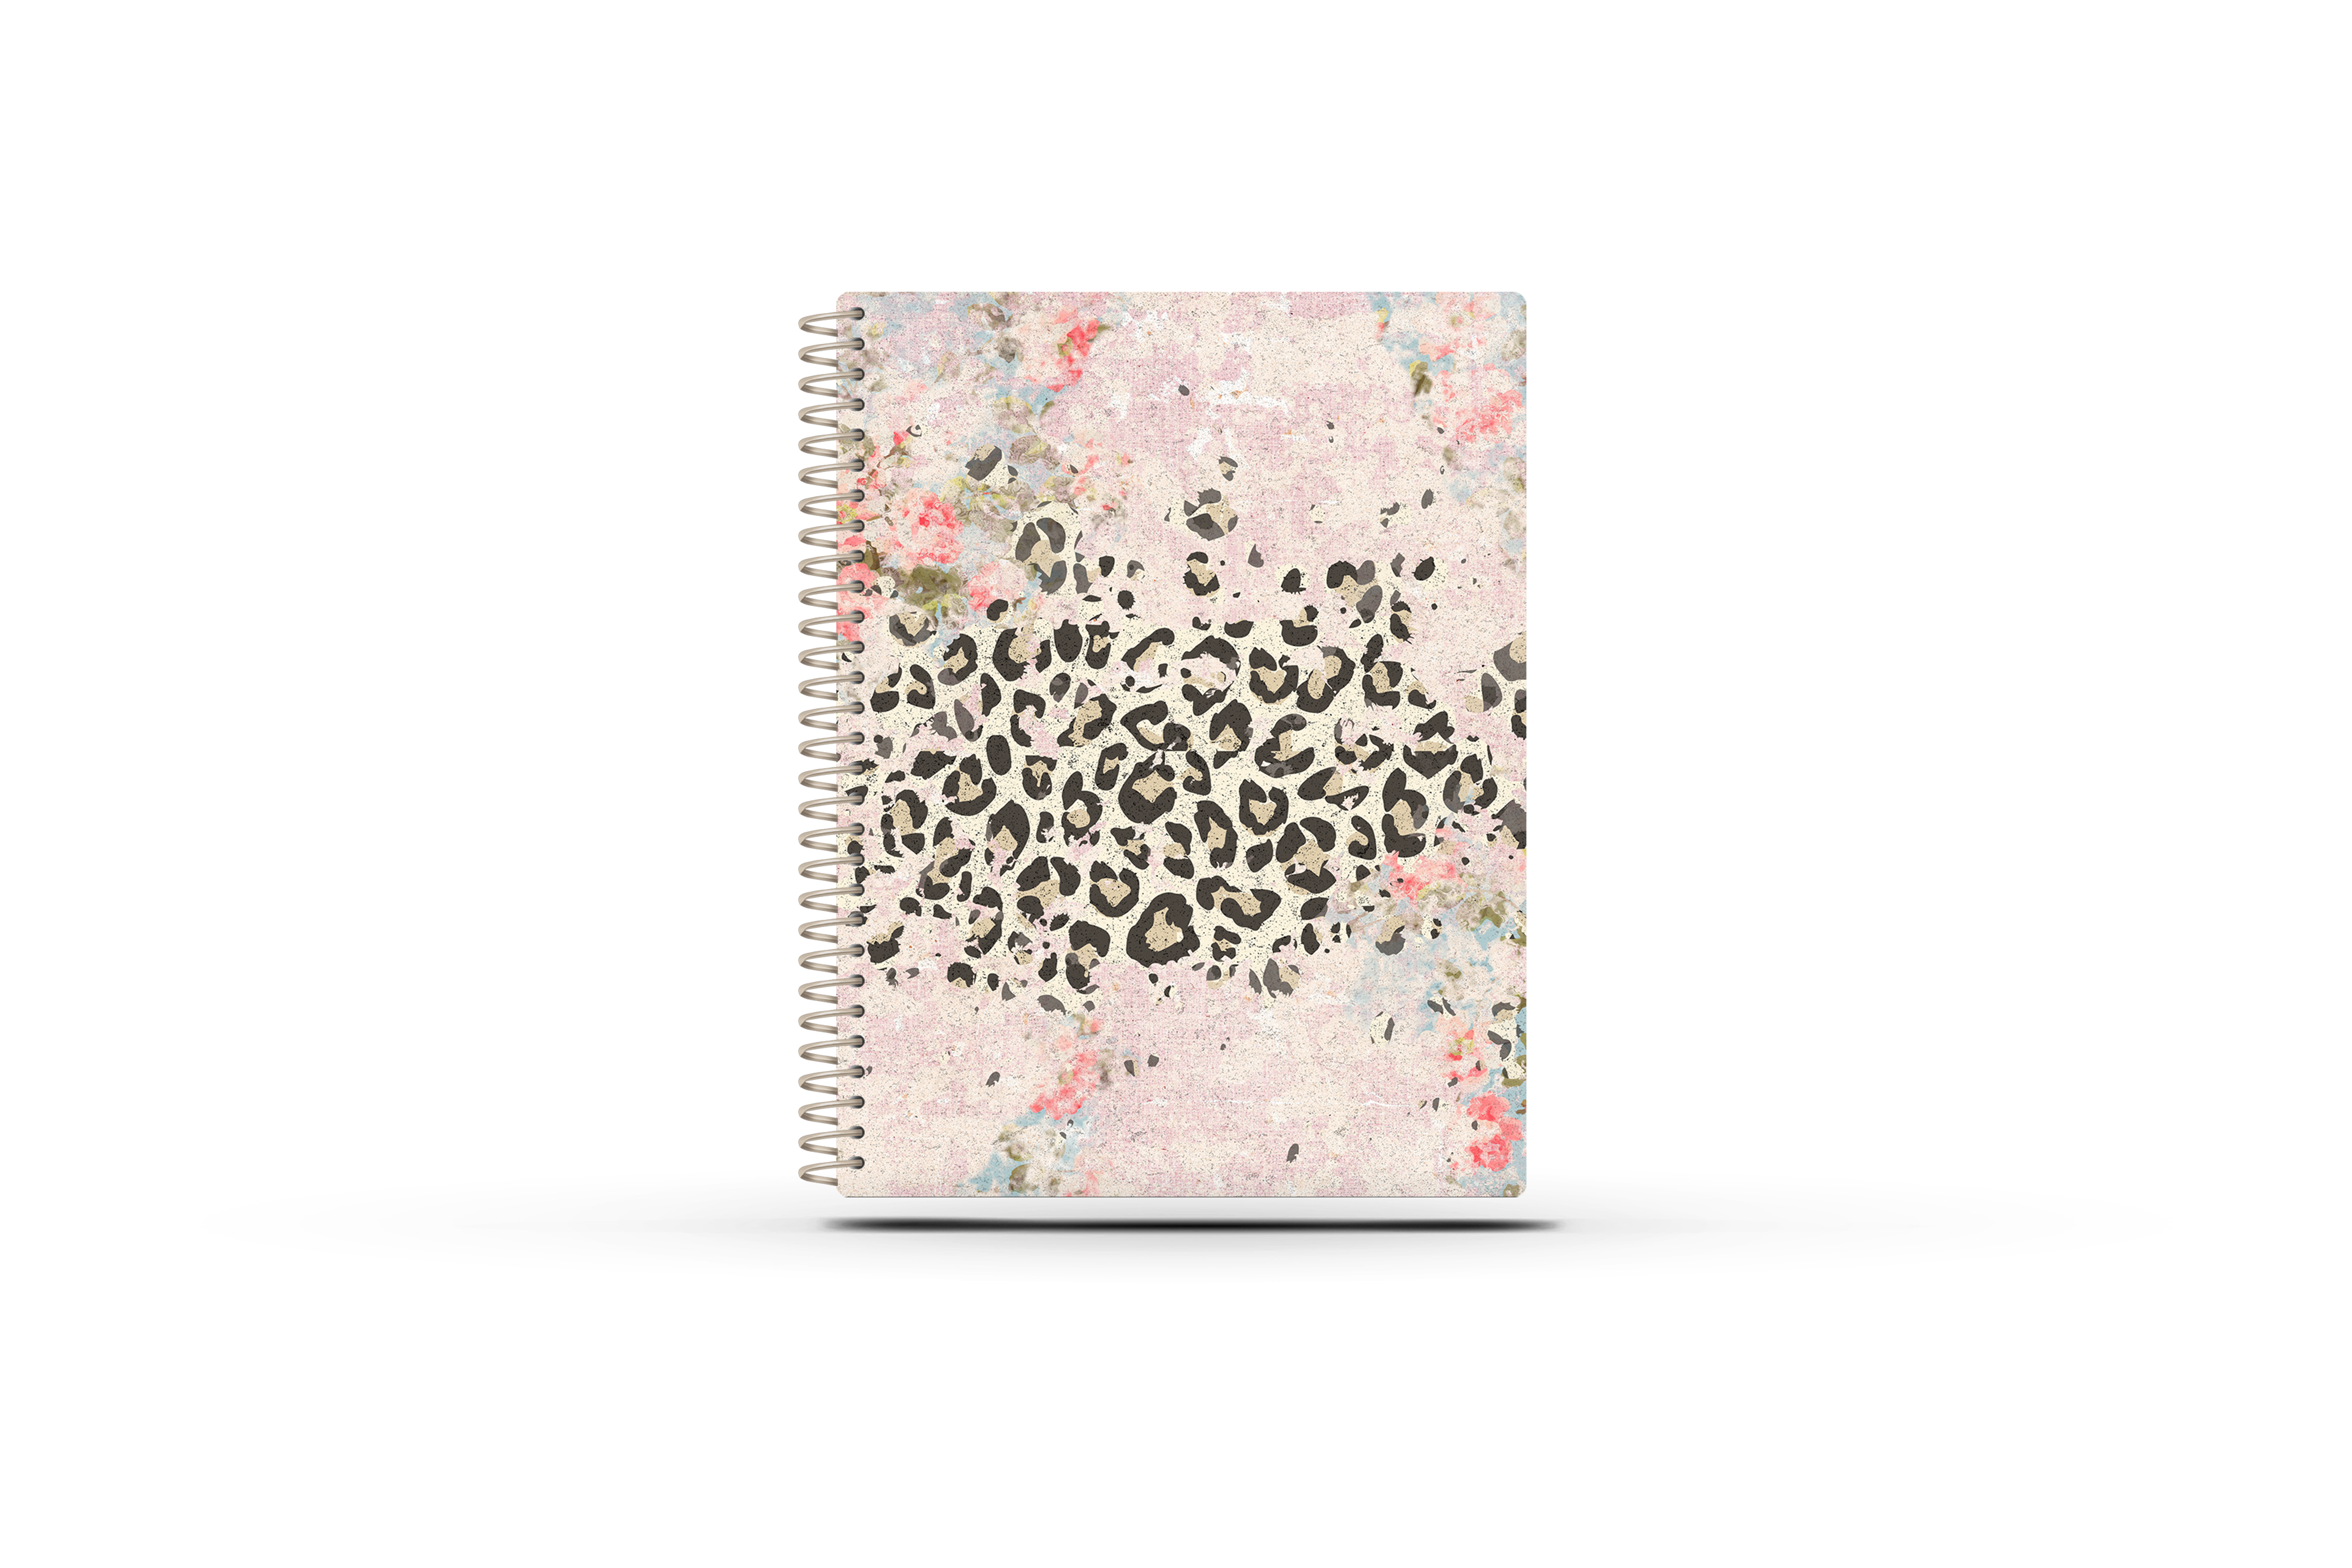 Photography Appointment Book - DSG LIGHT PINK CHEETAH